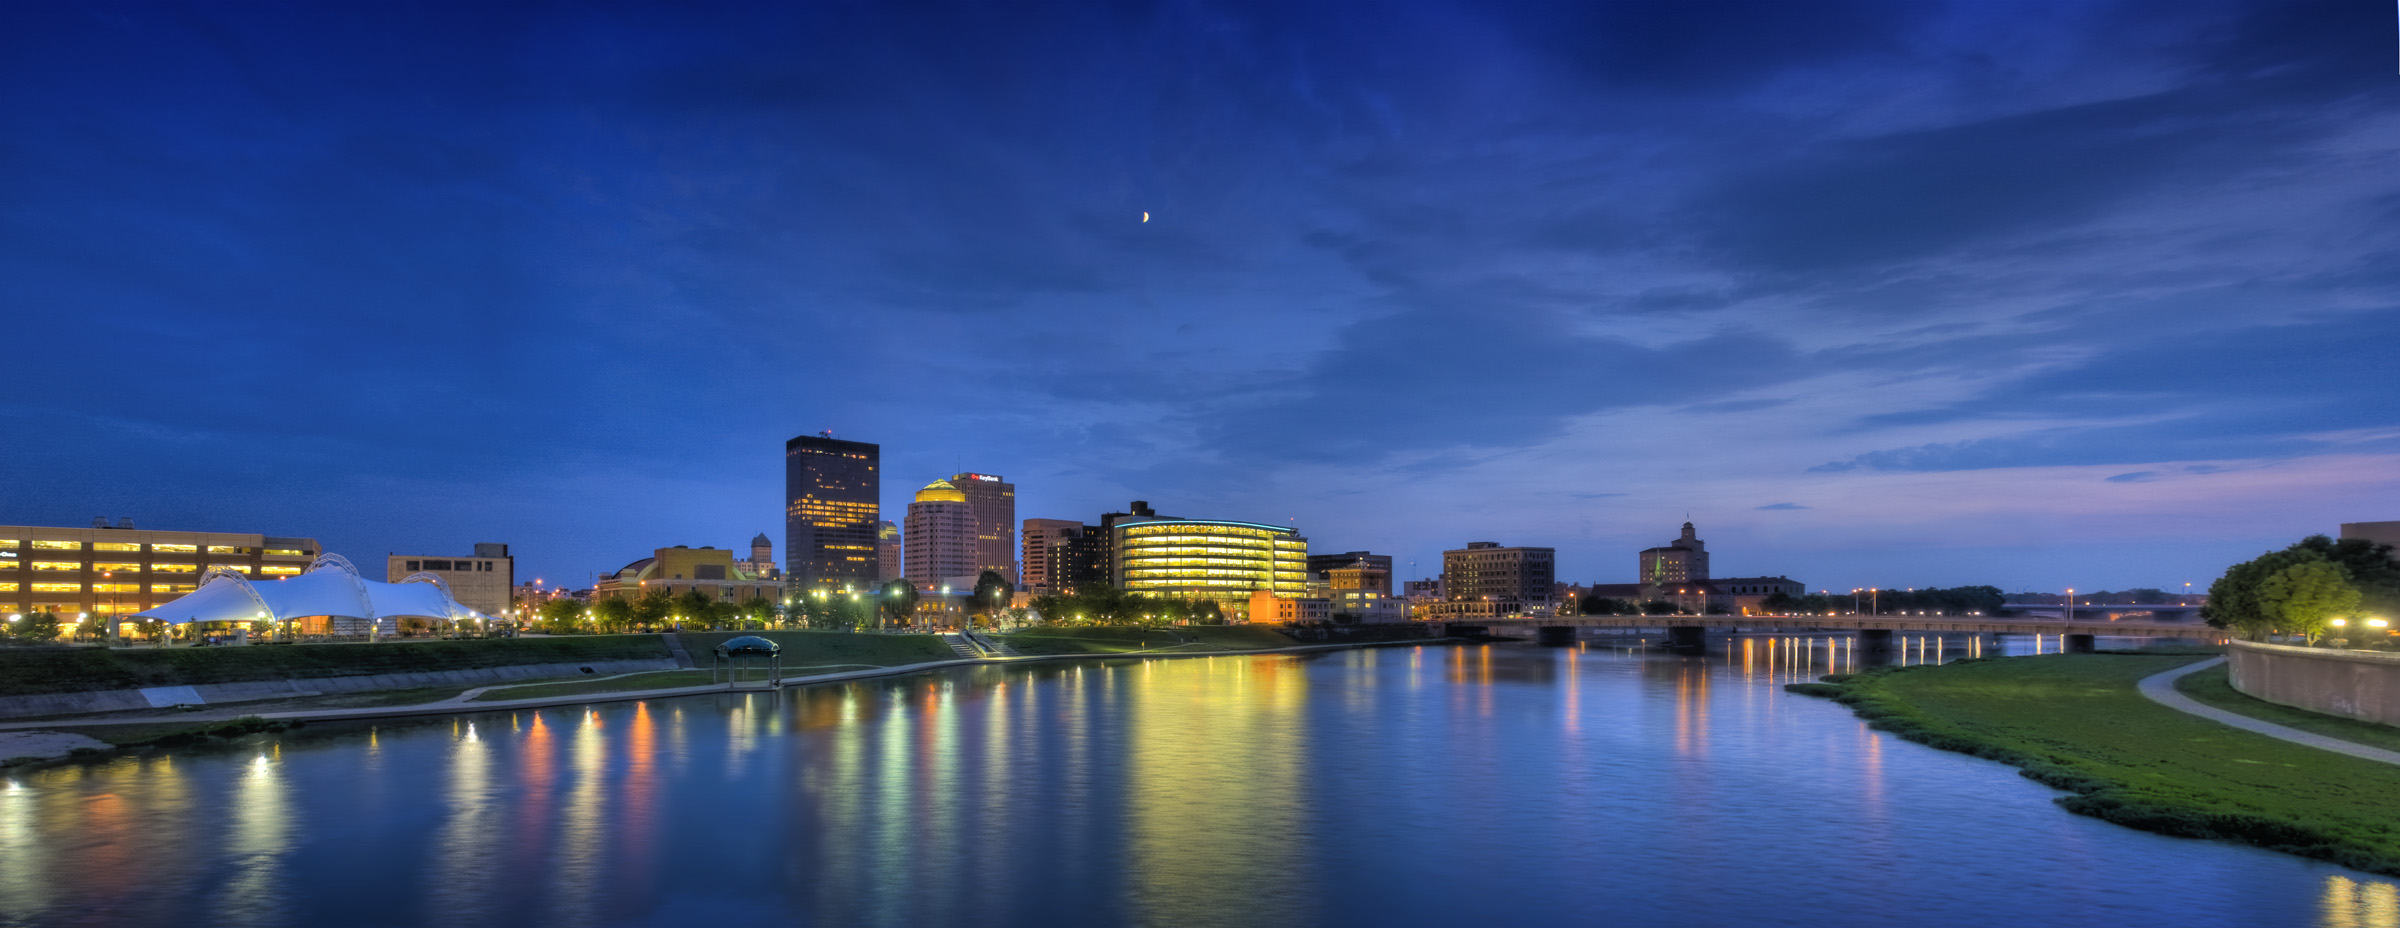 Panorama of Downtown Dayton skyline at twilight, looking across the Great Miami River near RiverScape MetroPark